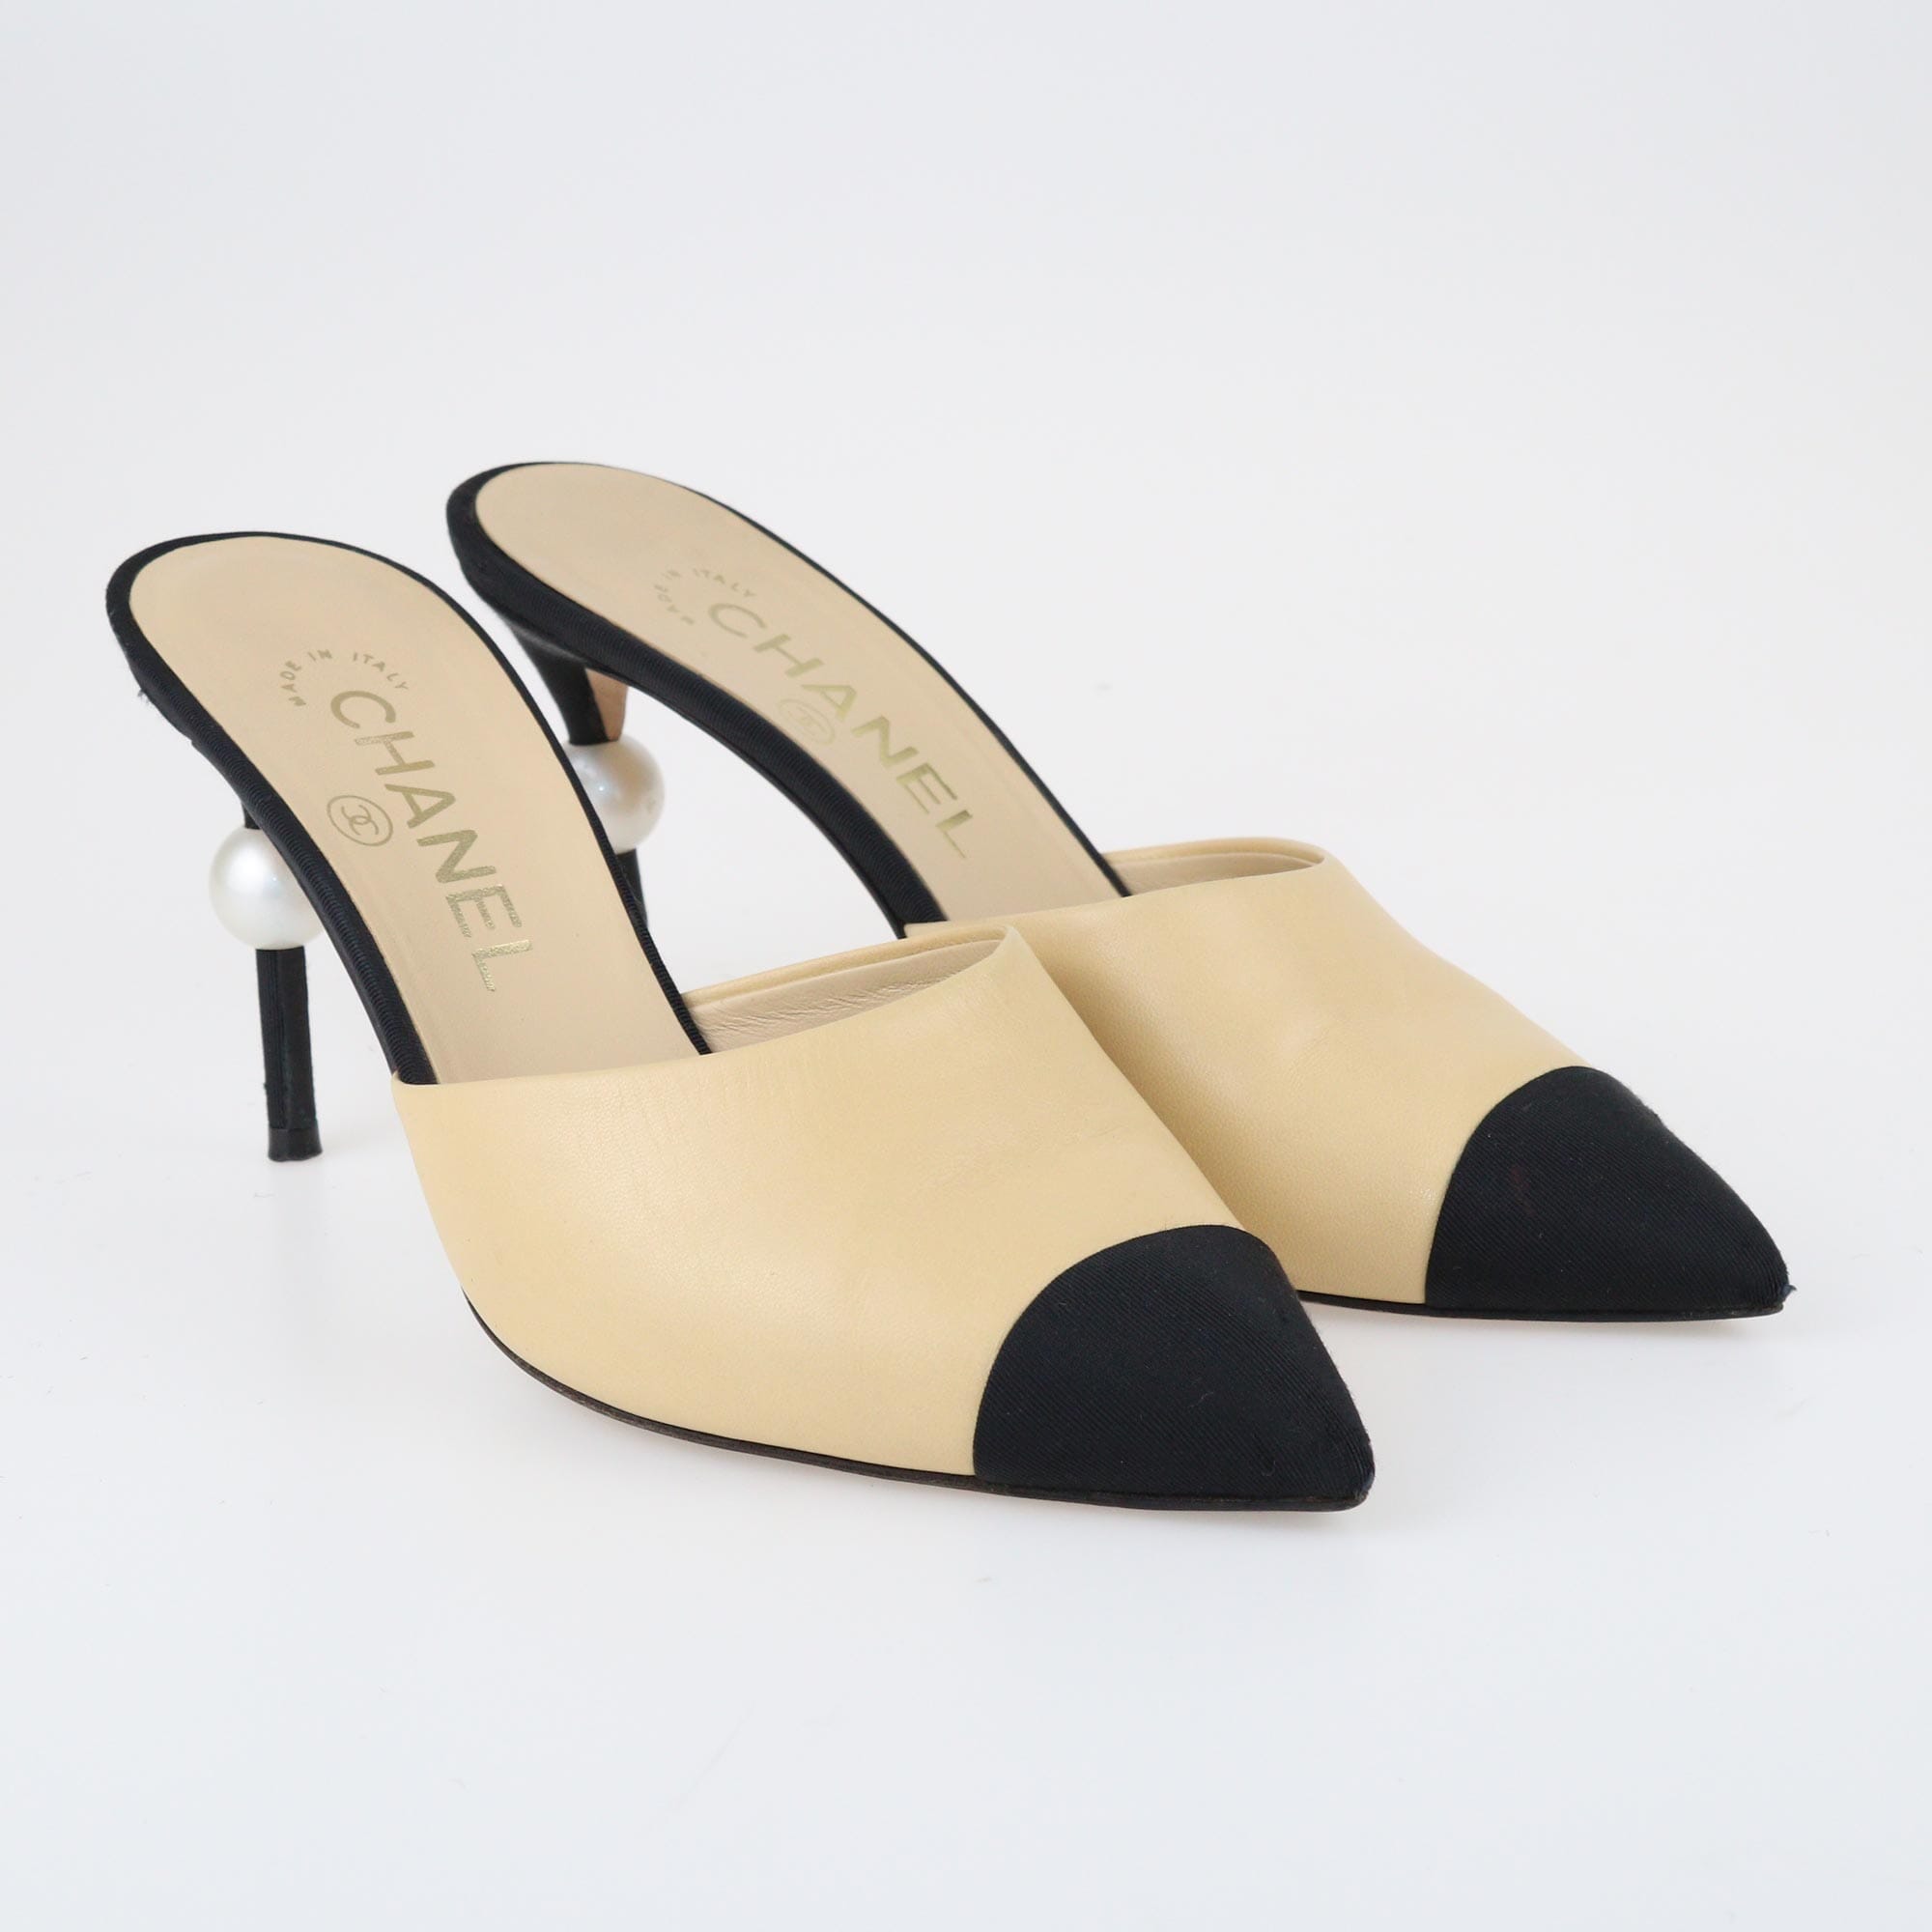 Beige/Black Pearl Heel Pointed Pumps Shoes Chanel 